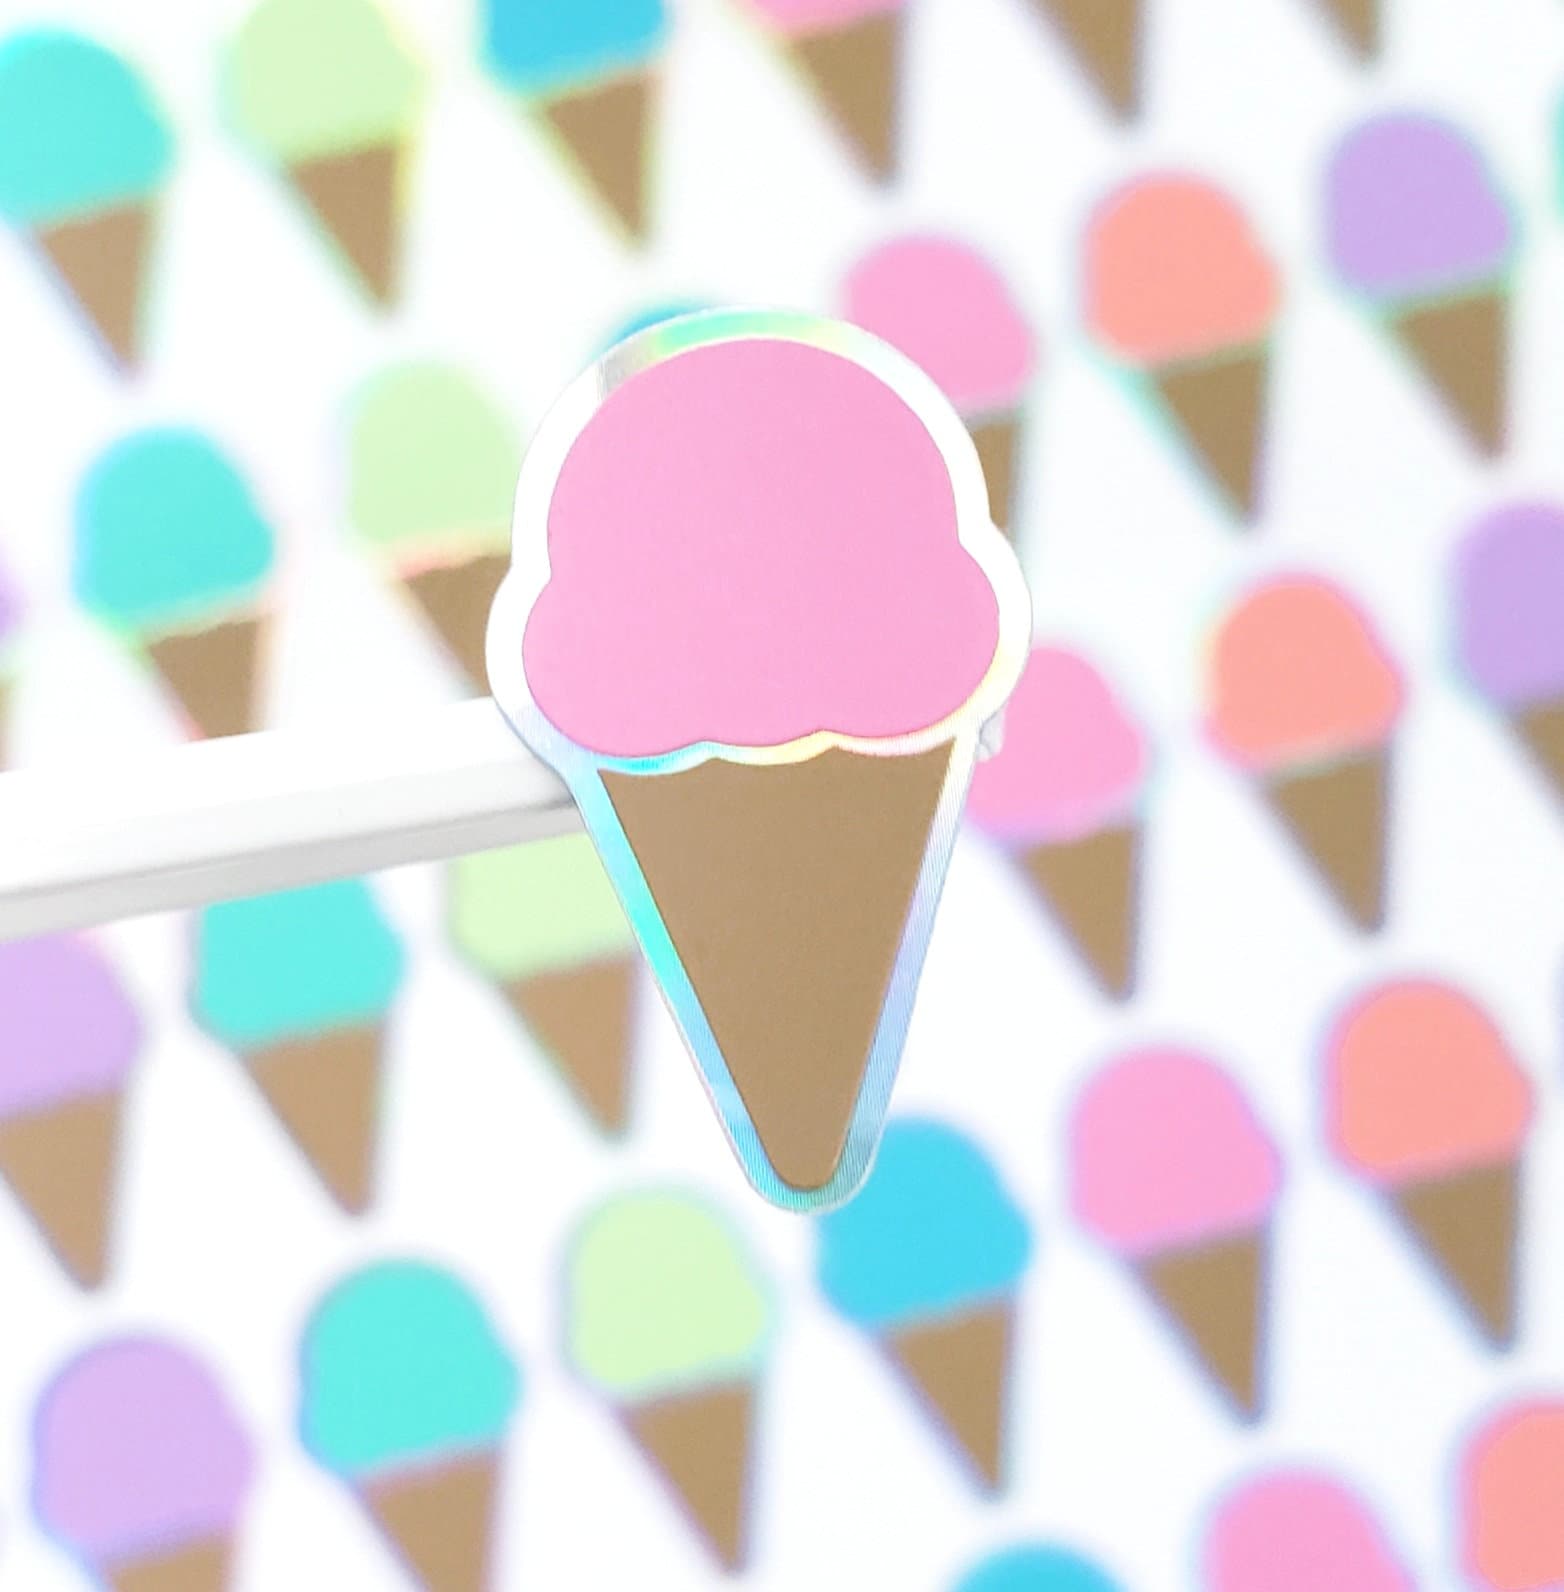 Ice Cream Cones Sticker Sheet, Set of 60 Rainbow Pastel Vinyl Decals for Party Invitations, Envelopes, and Planners.